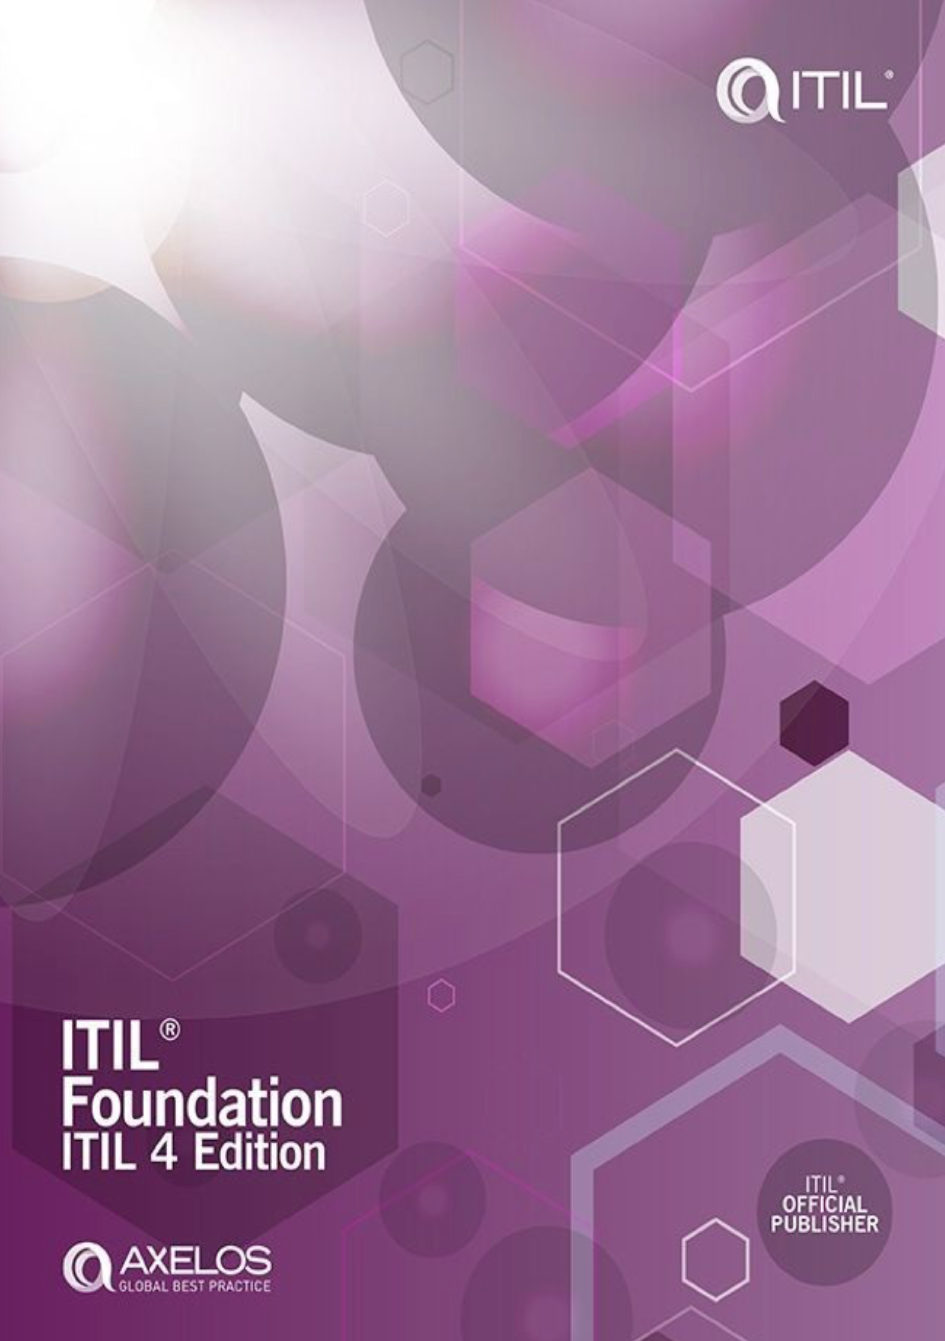 ITIL Foundation: 4th edition
